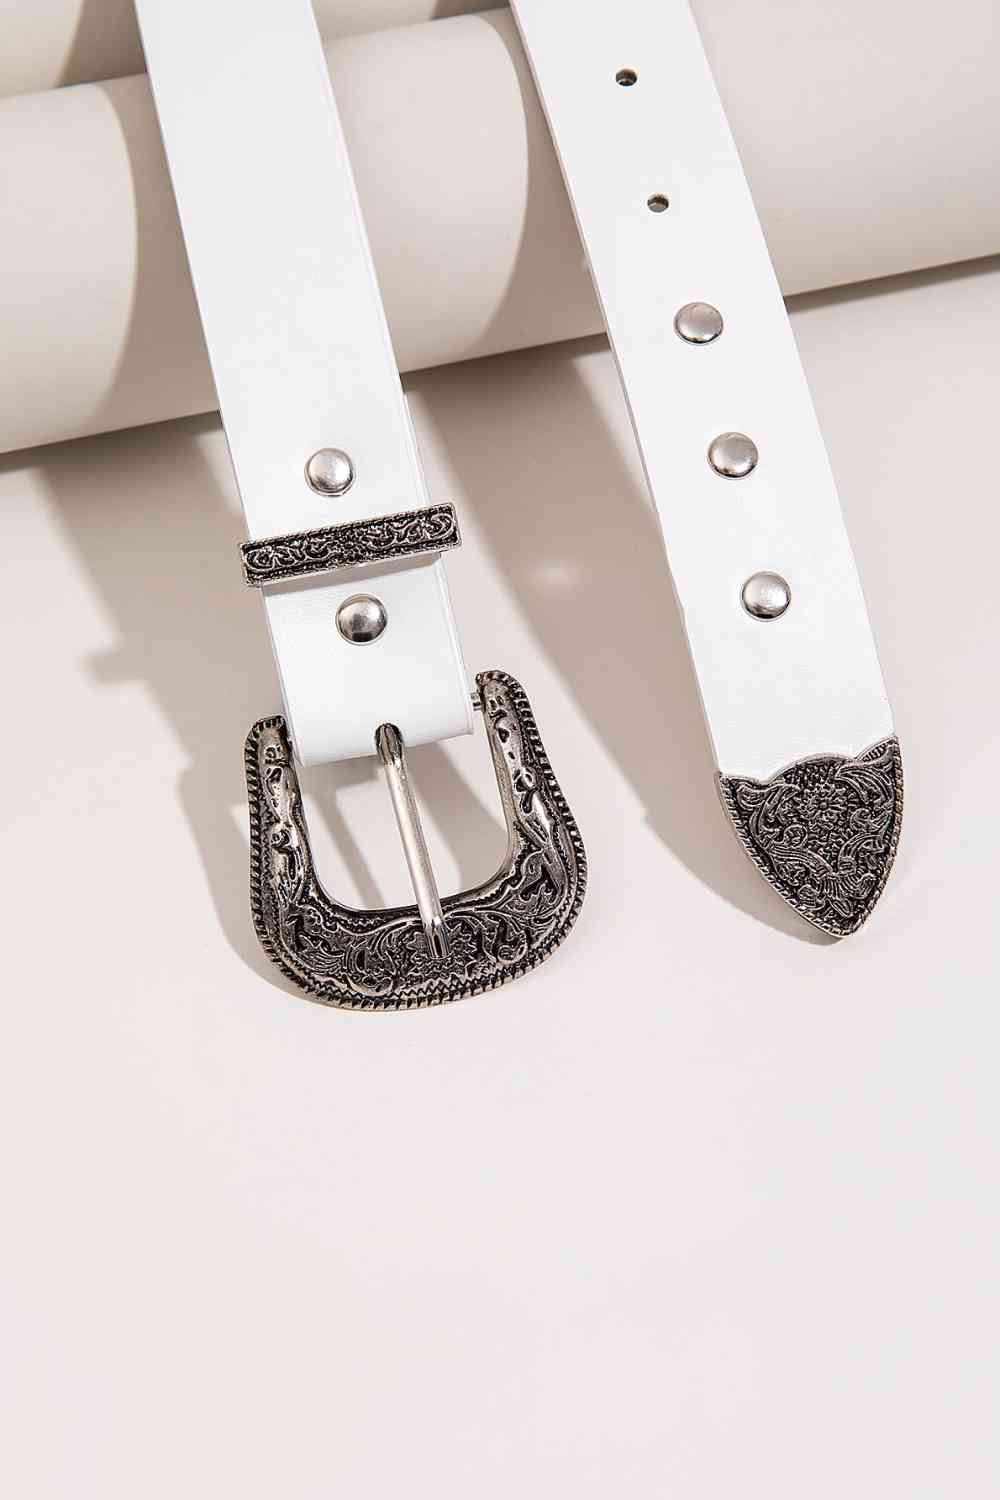 PU Leather Studded Belt Print on any thing USA/STOD clothes